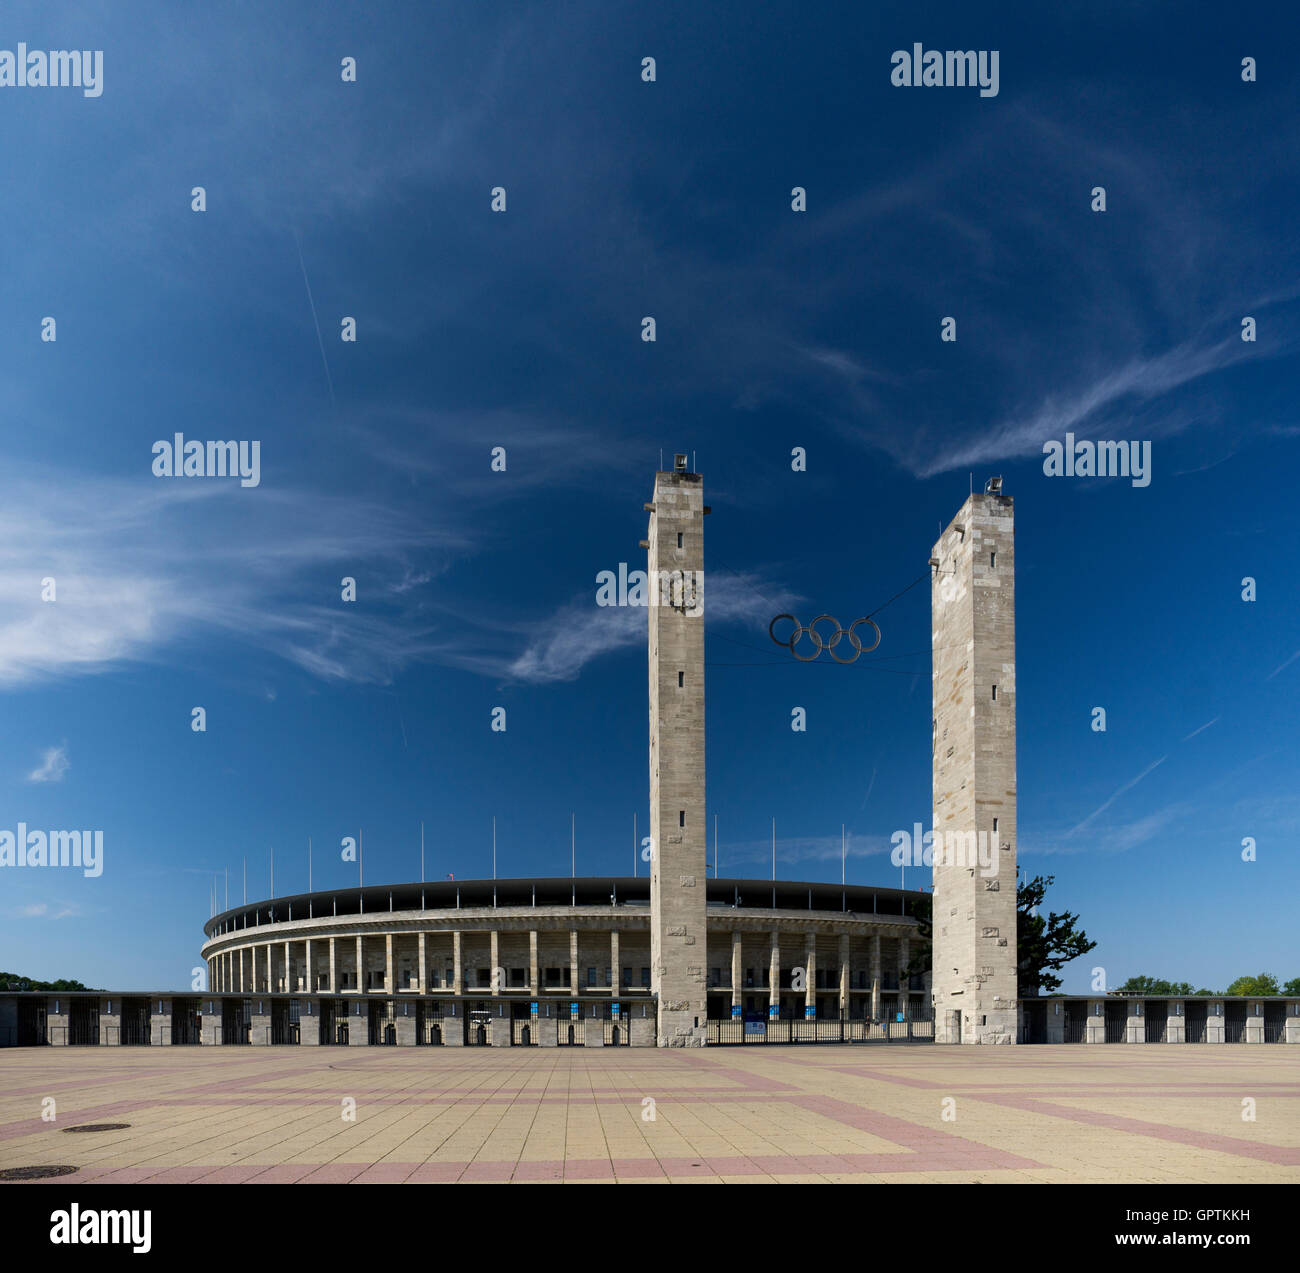 Olympiastadion Berlin Banque D'Images